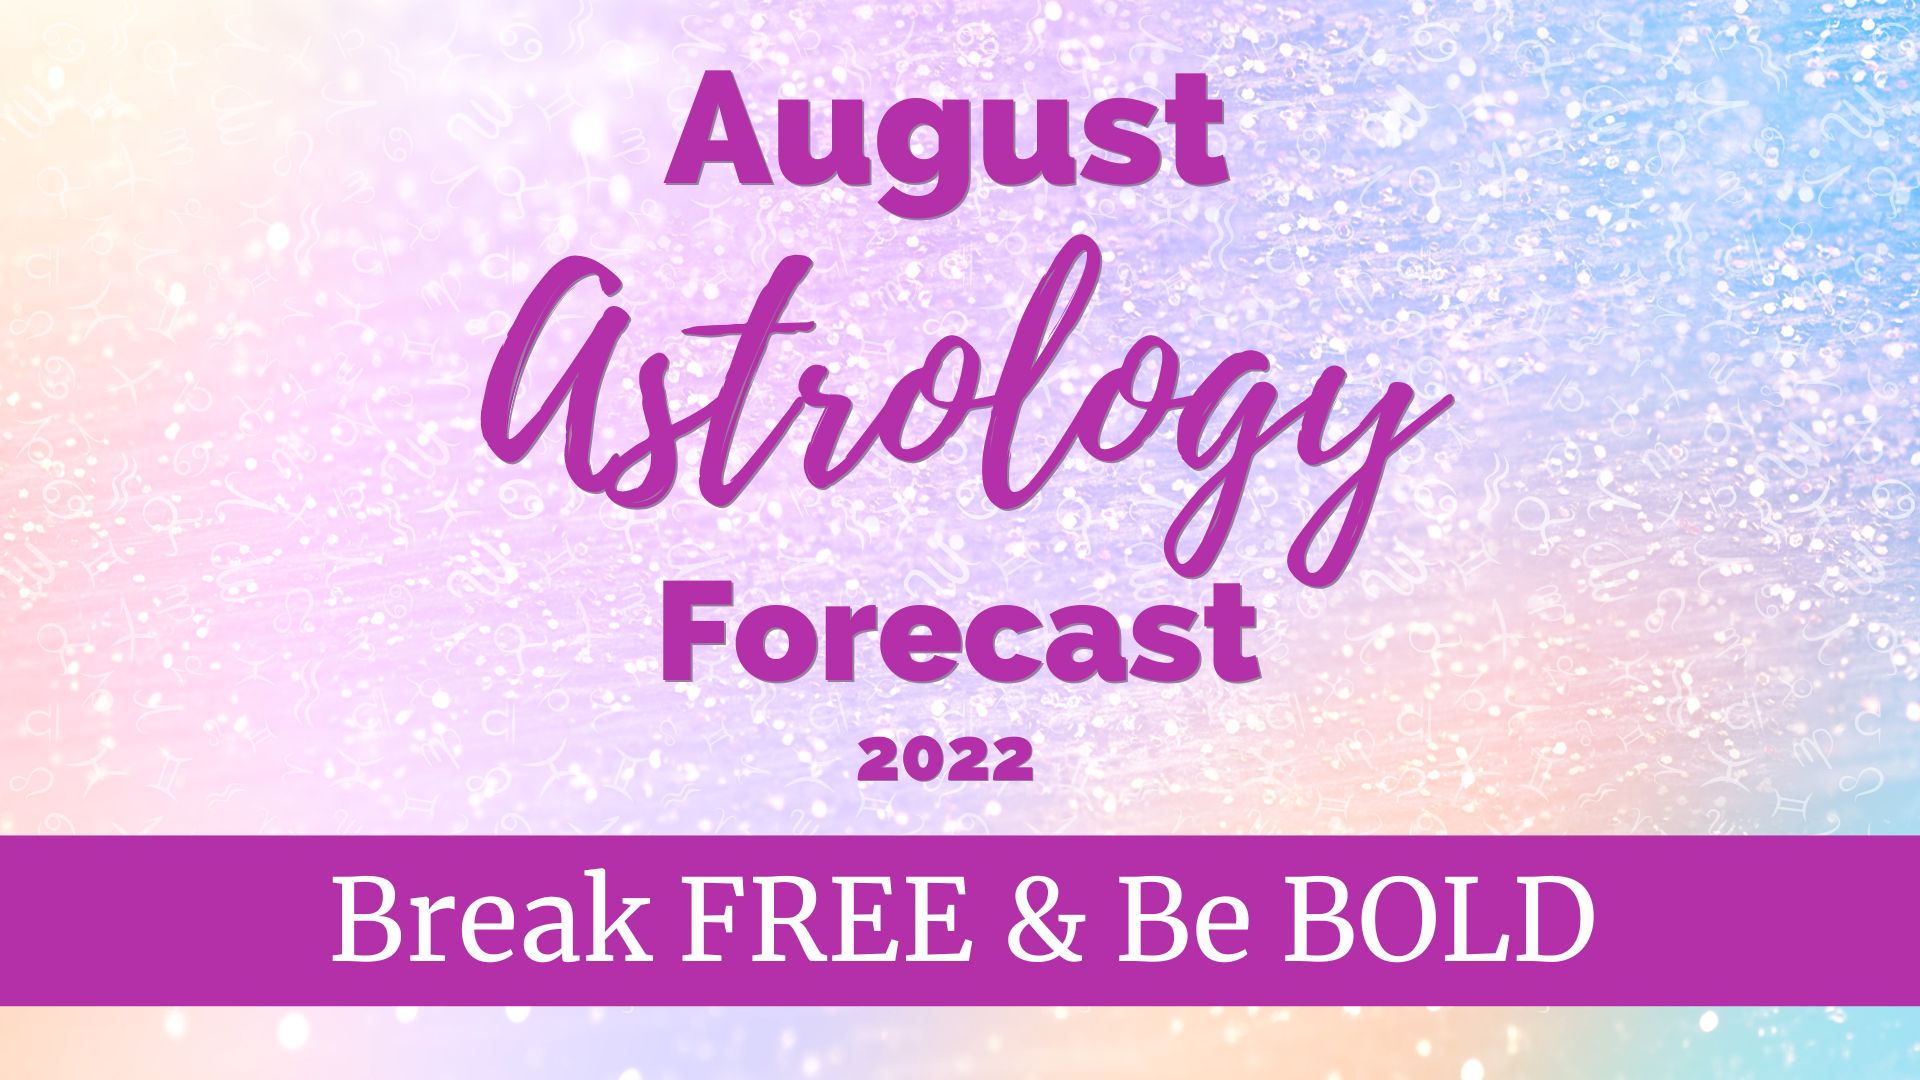 August 2022 Forecast